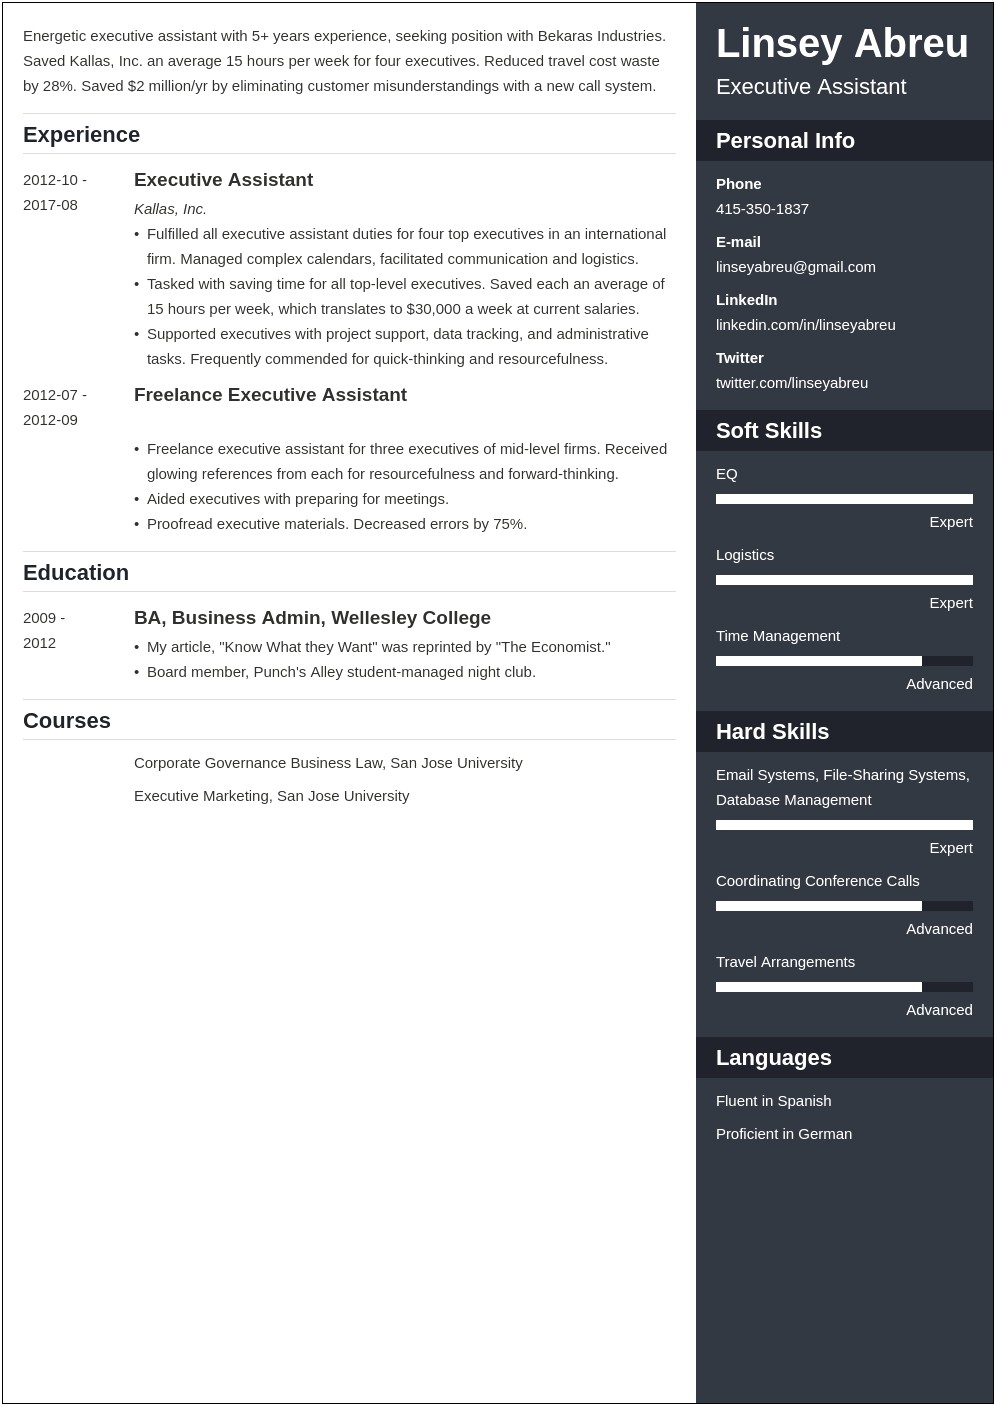 C Level Executive Assistant Resume Samples